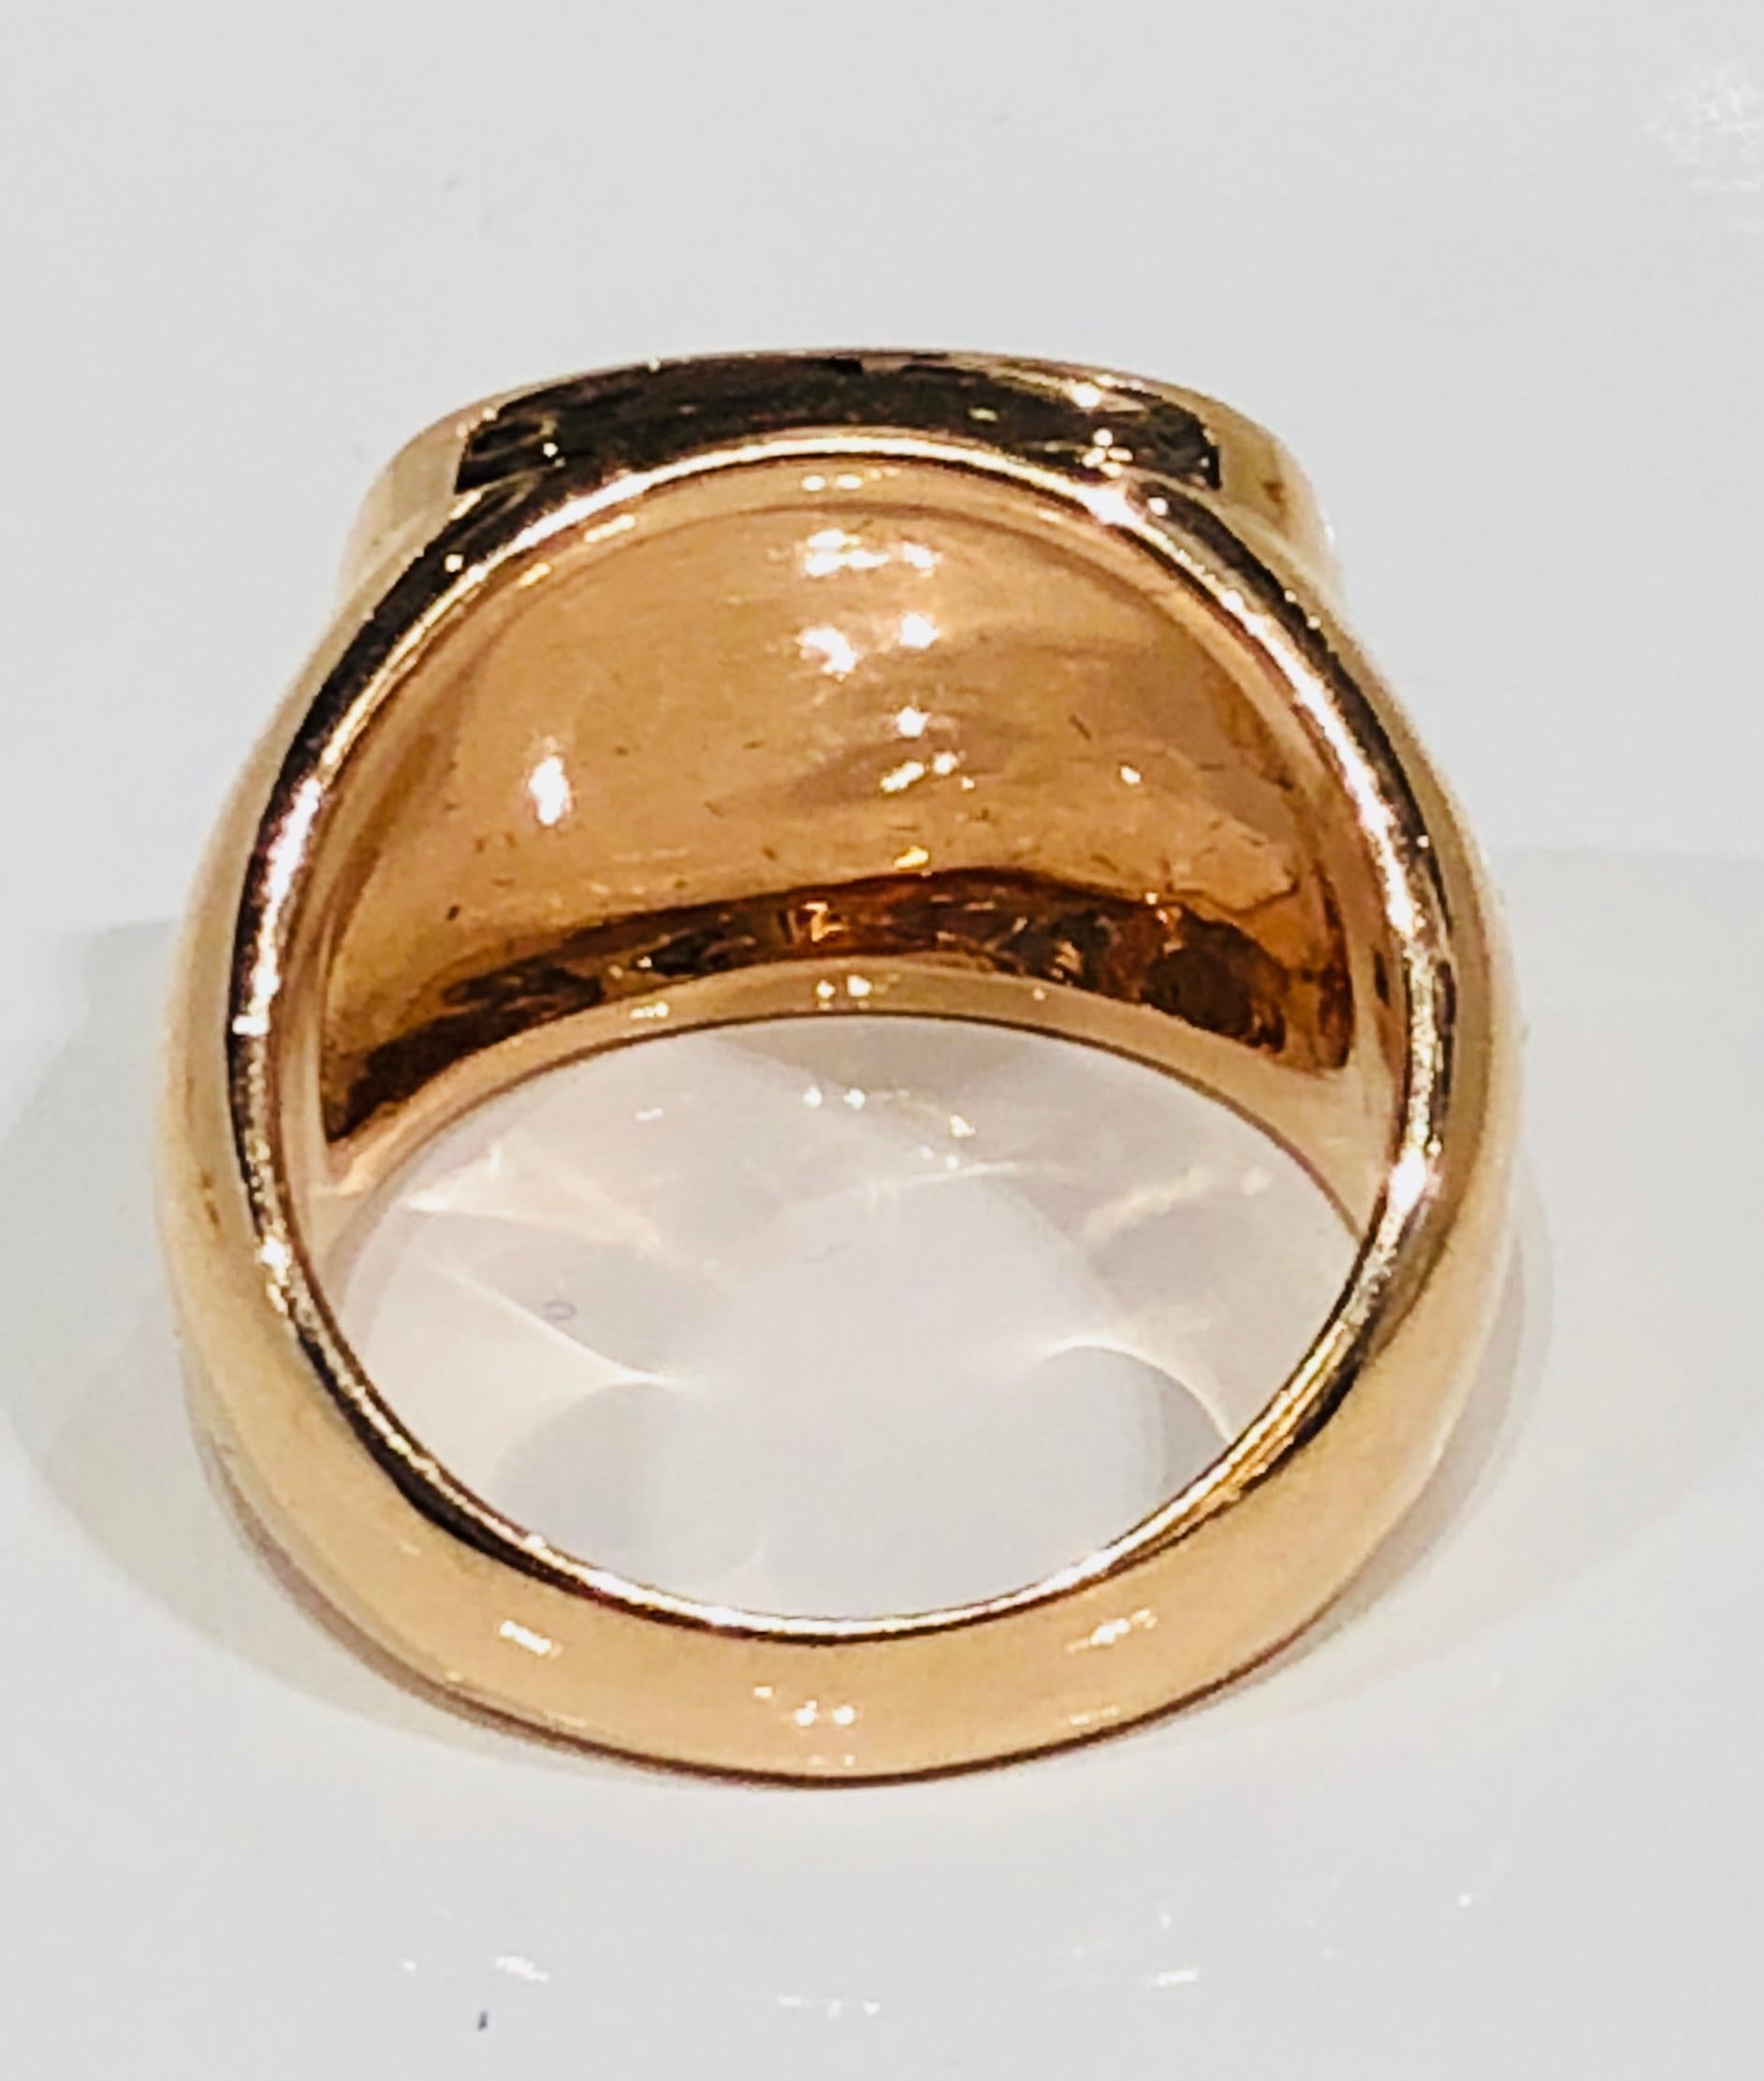 imperial signet ring